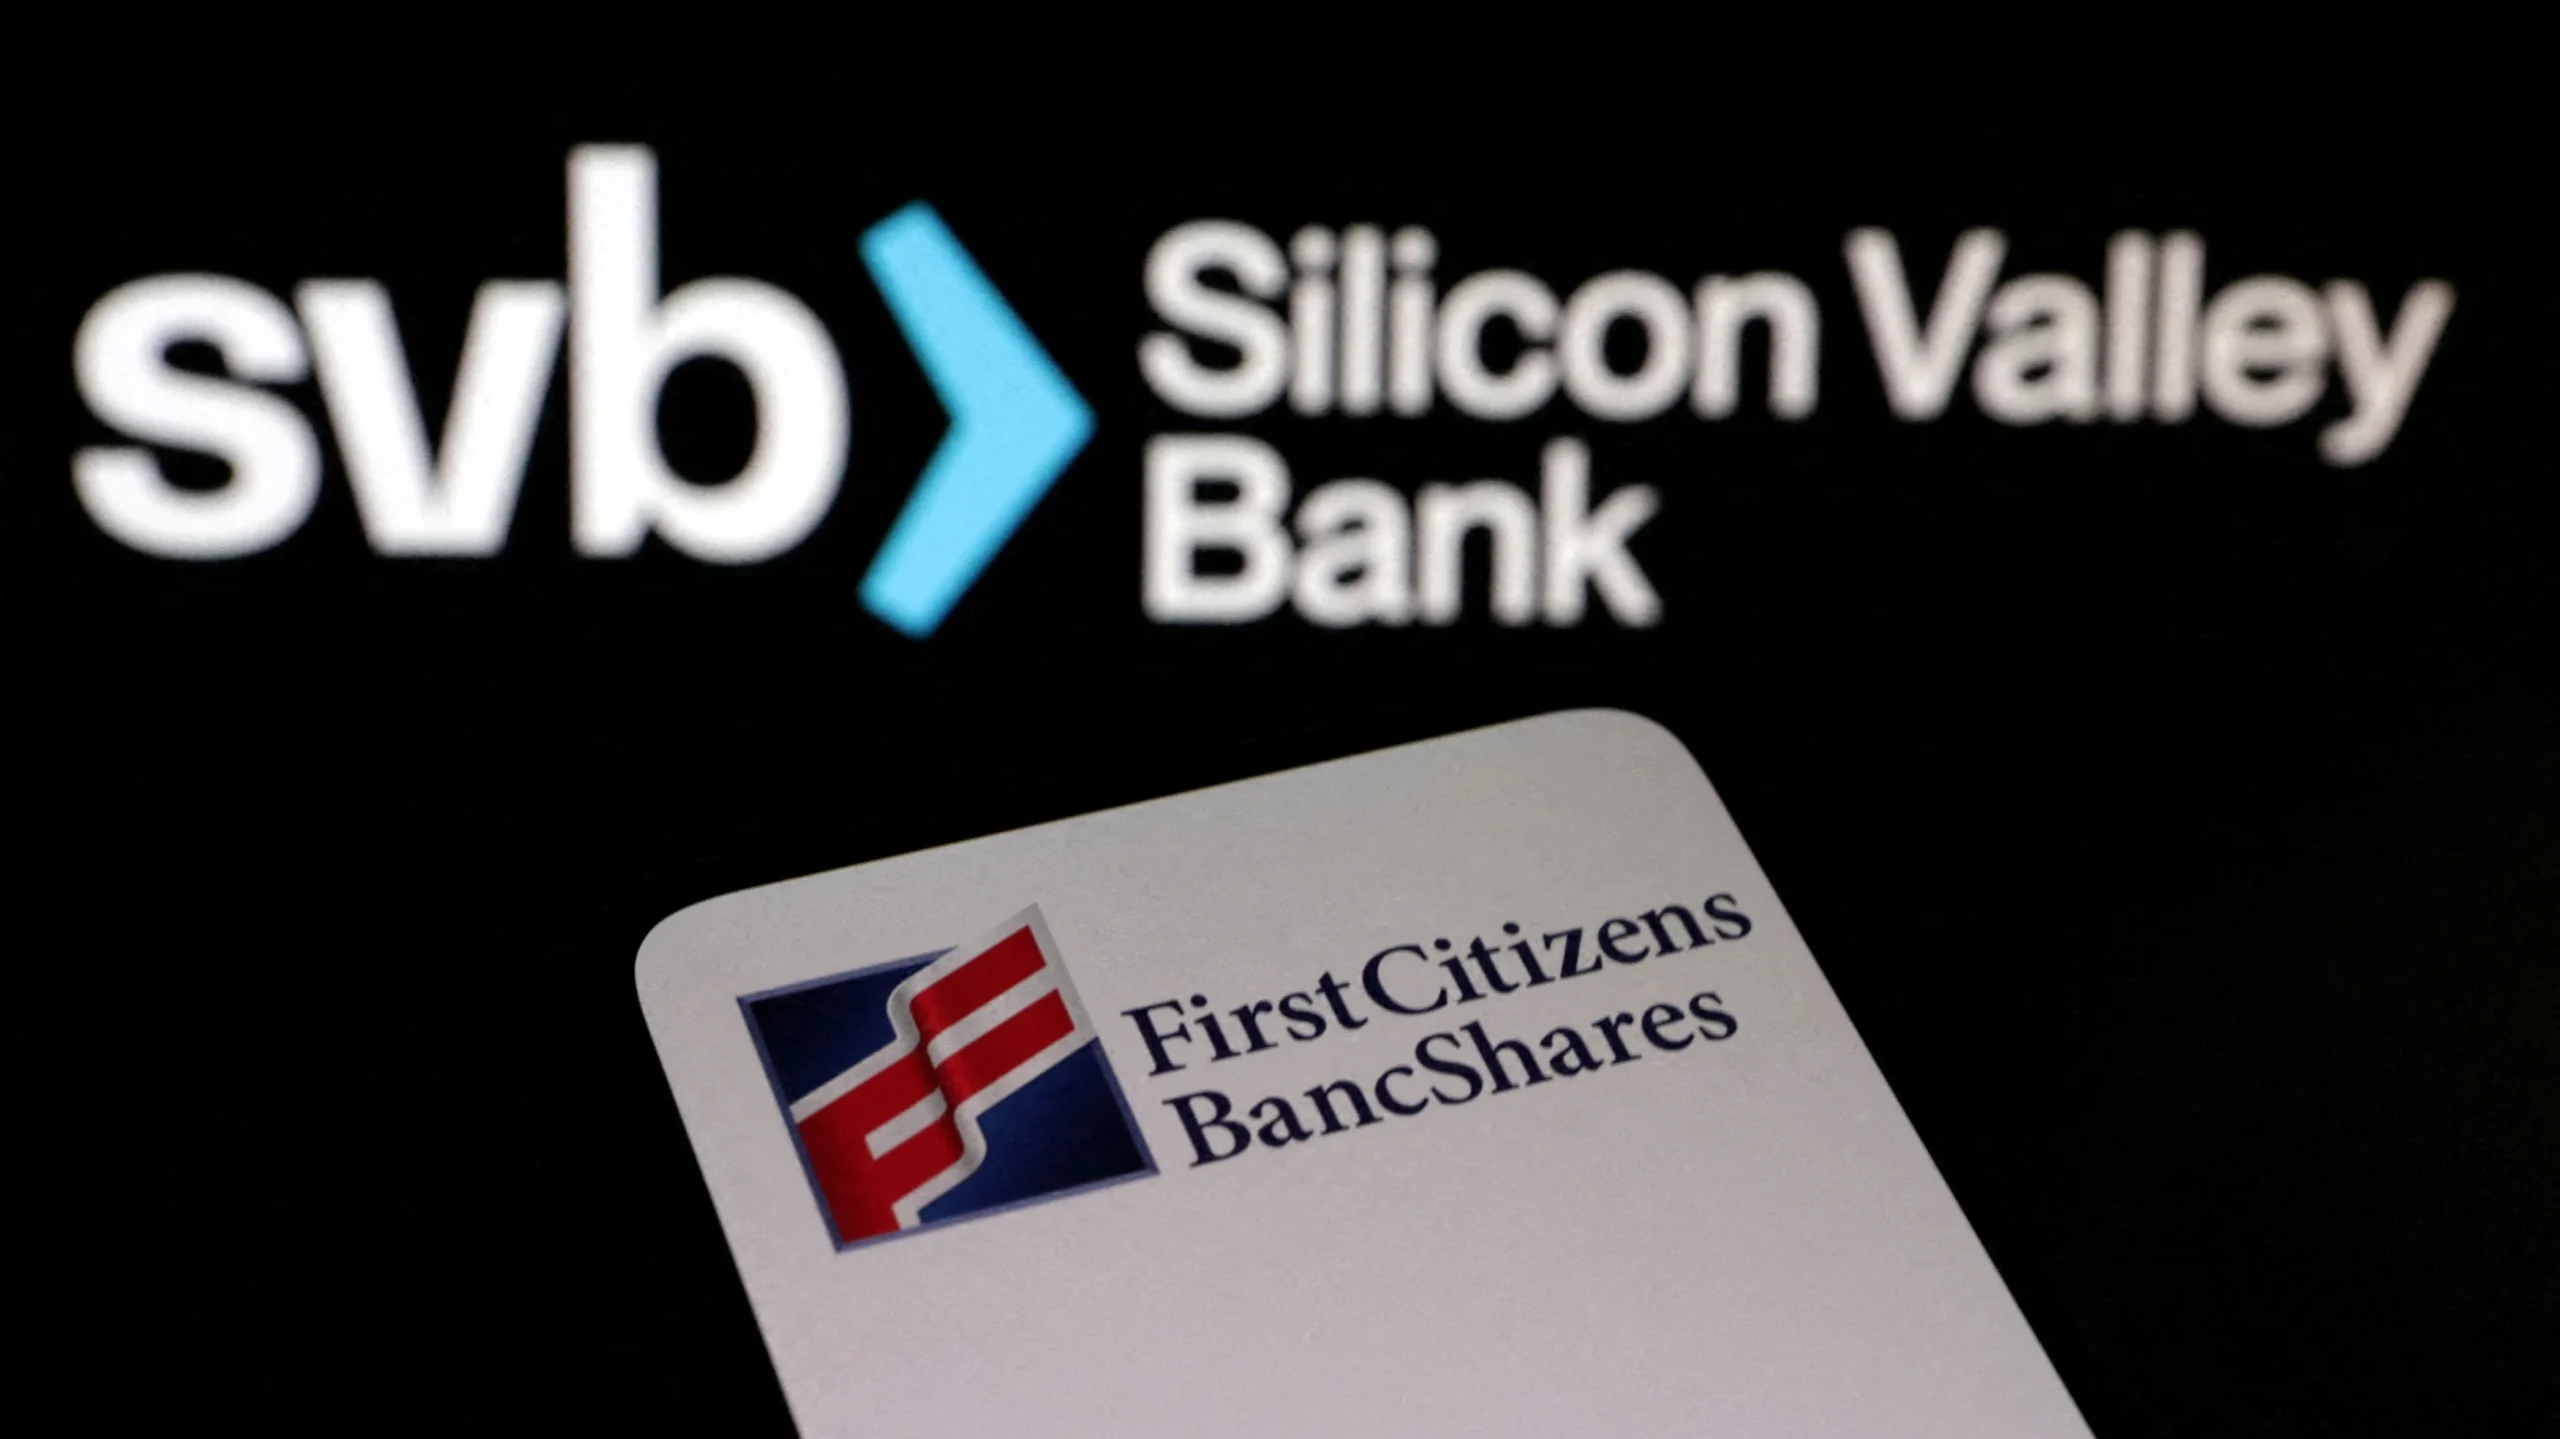 First Citizens to Acquire Silicon Valley Bank's Assets